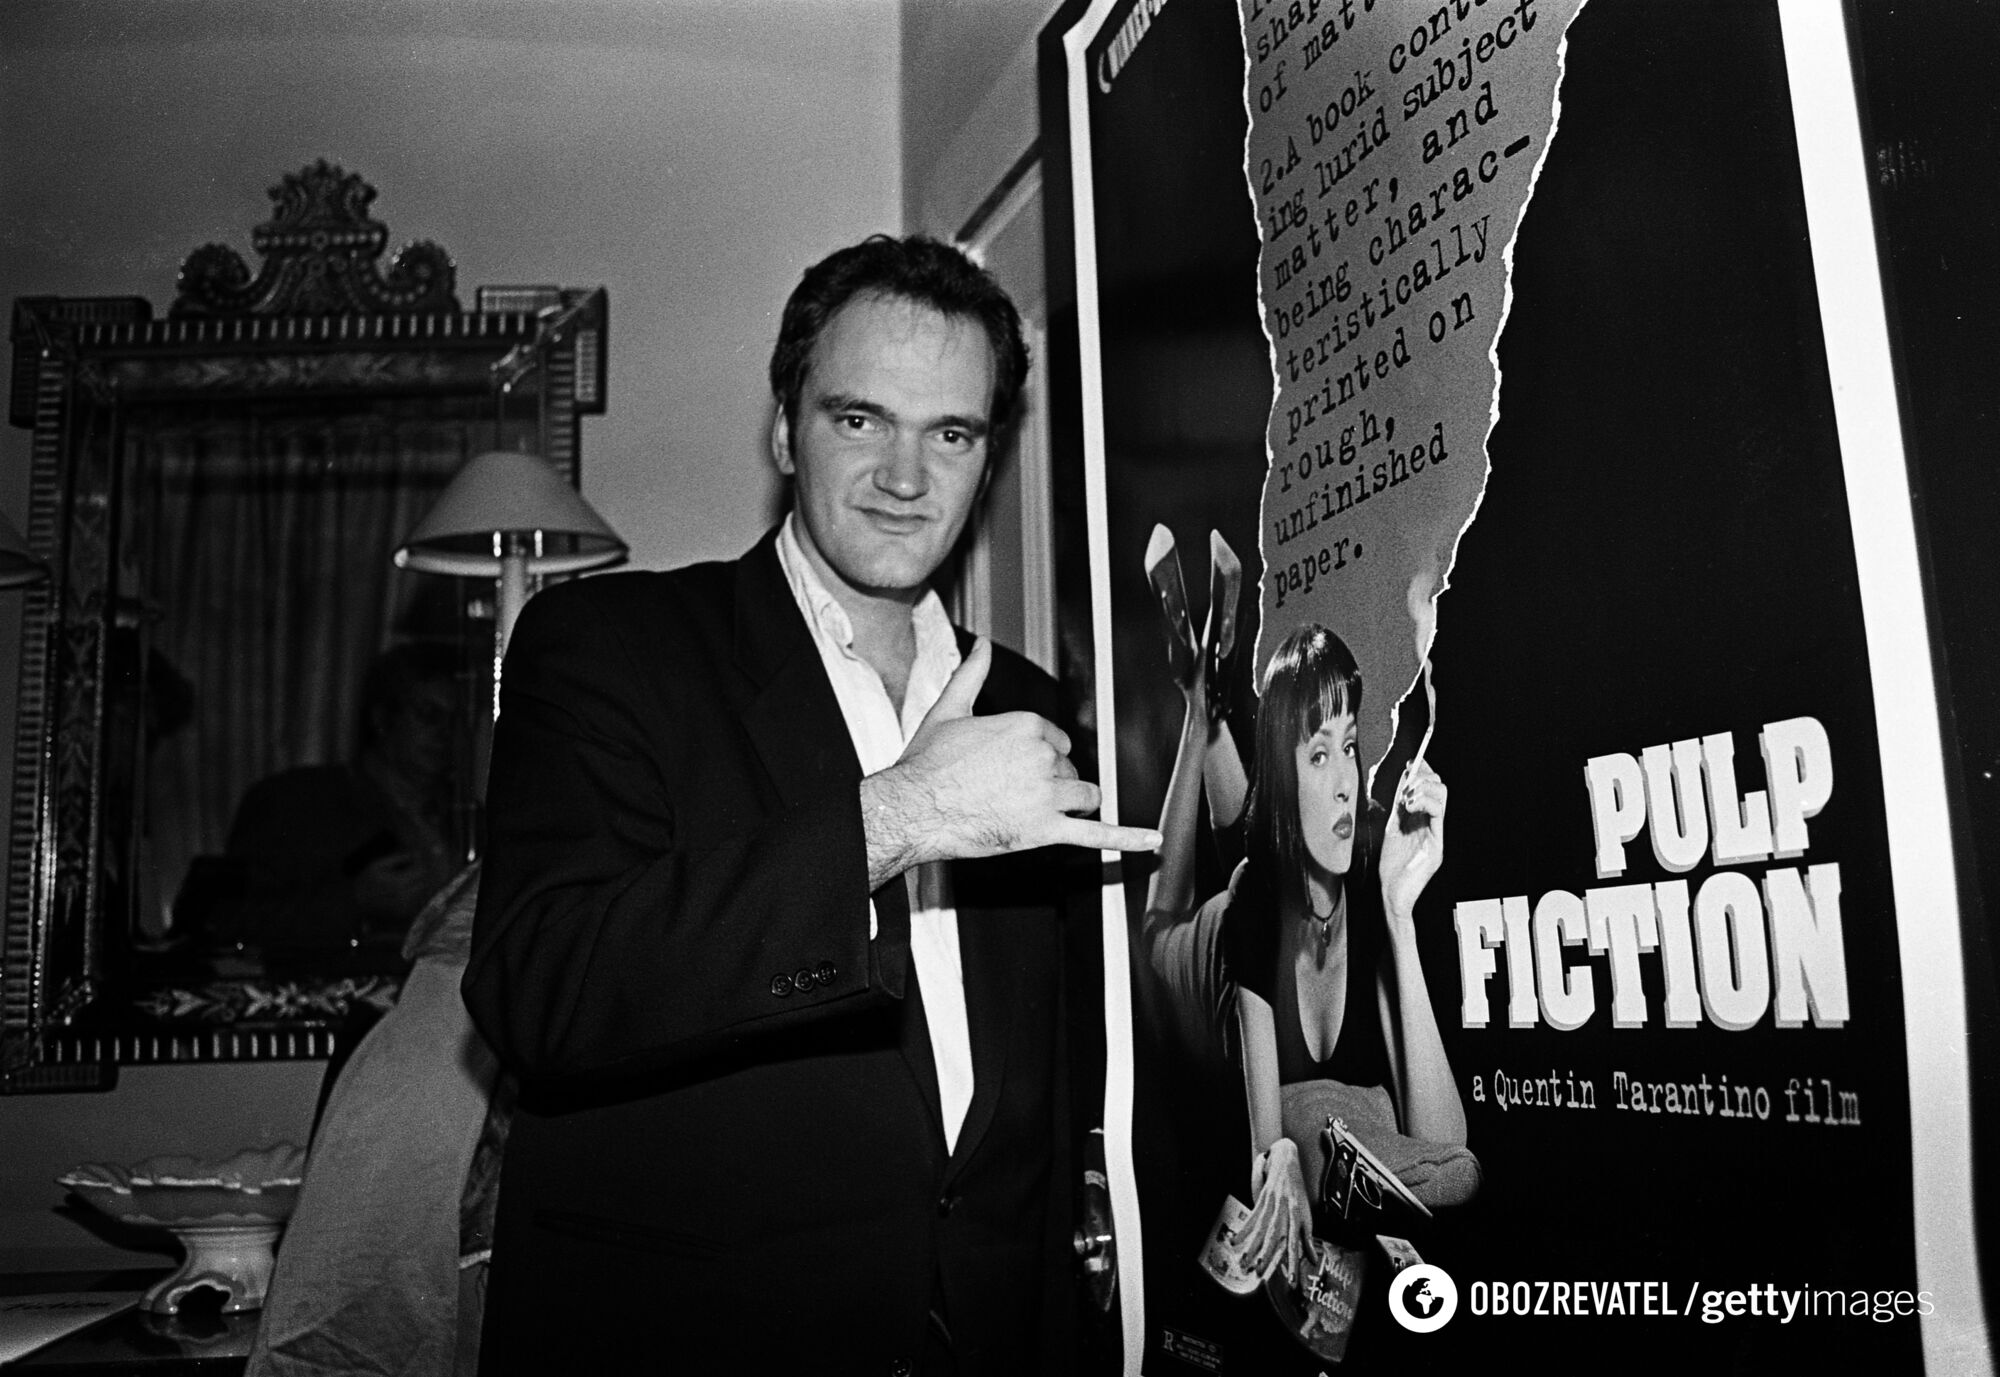 From selling pornography to shooting cult movies: 7 interesting facts about Quentin Tarantino, who turns 61 today. Photo